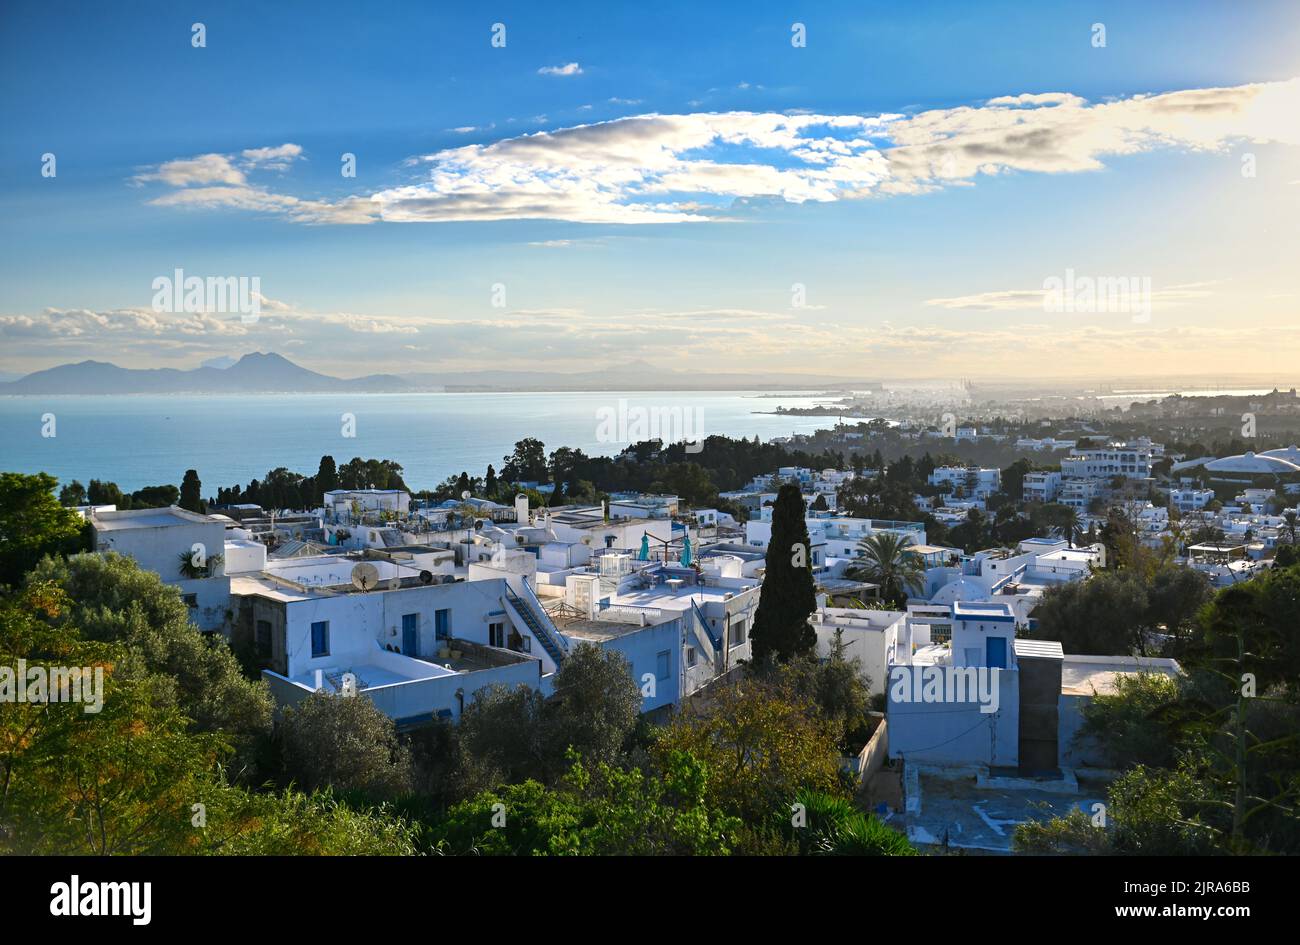 Tunisia, Sidi Bou Said: the town and its white houses with blue doors and rooftop terraces which combine Arabic and Andalusian architecture, set high Stock Photo